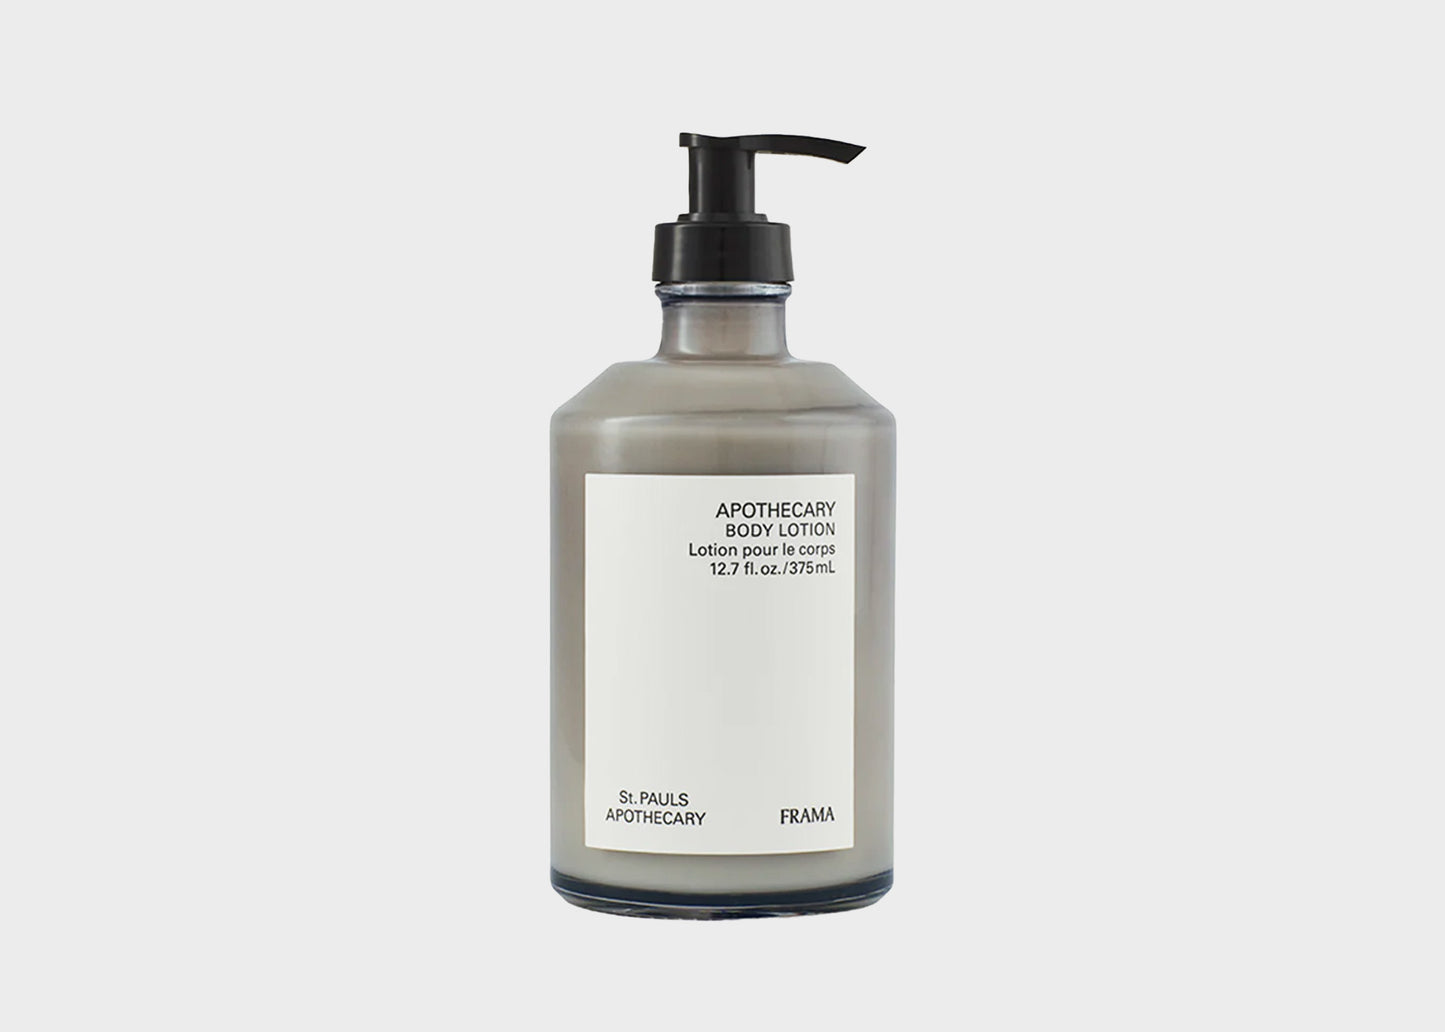 Body Lotion Apothecary 375ml by FRAMA